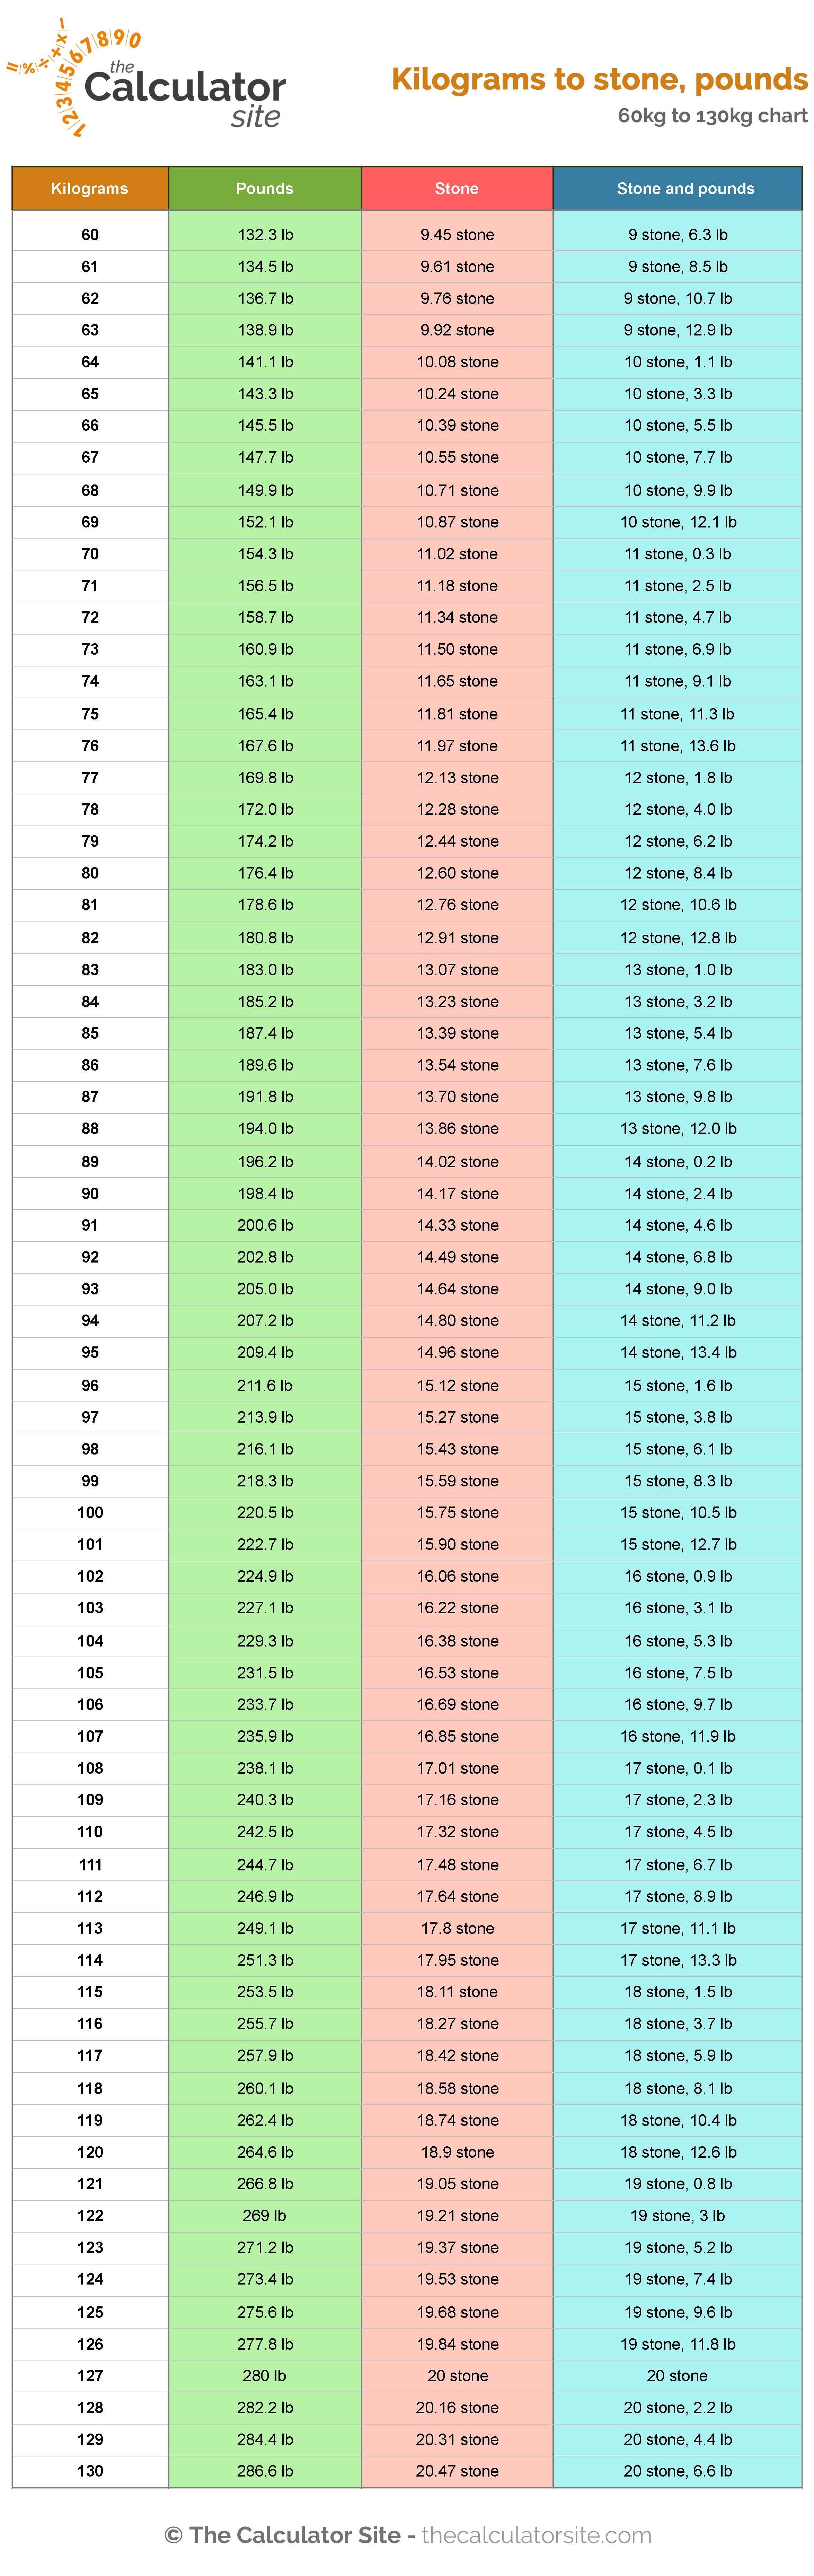 Kilograms to stone and pounds chart